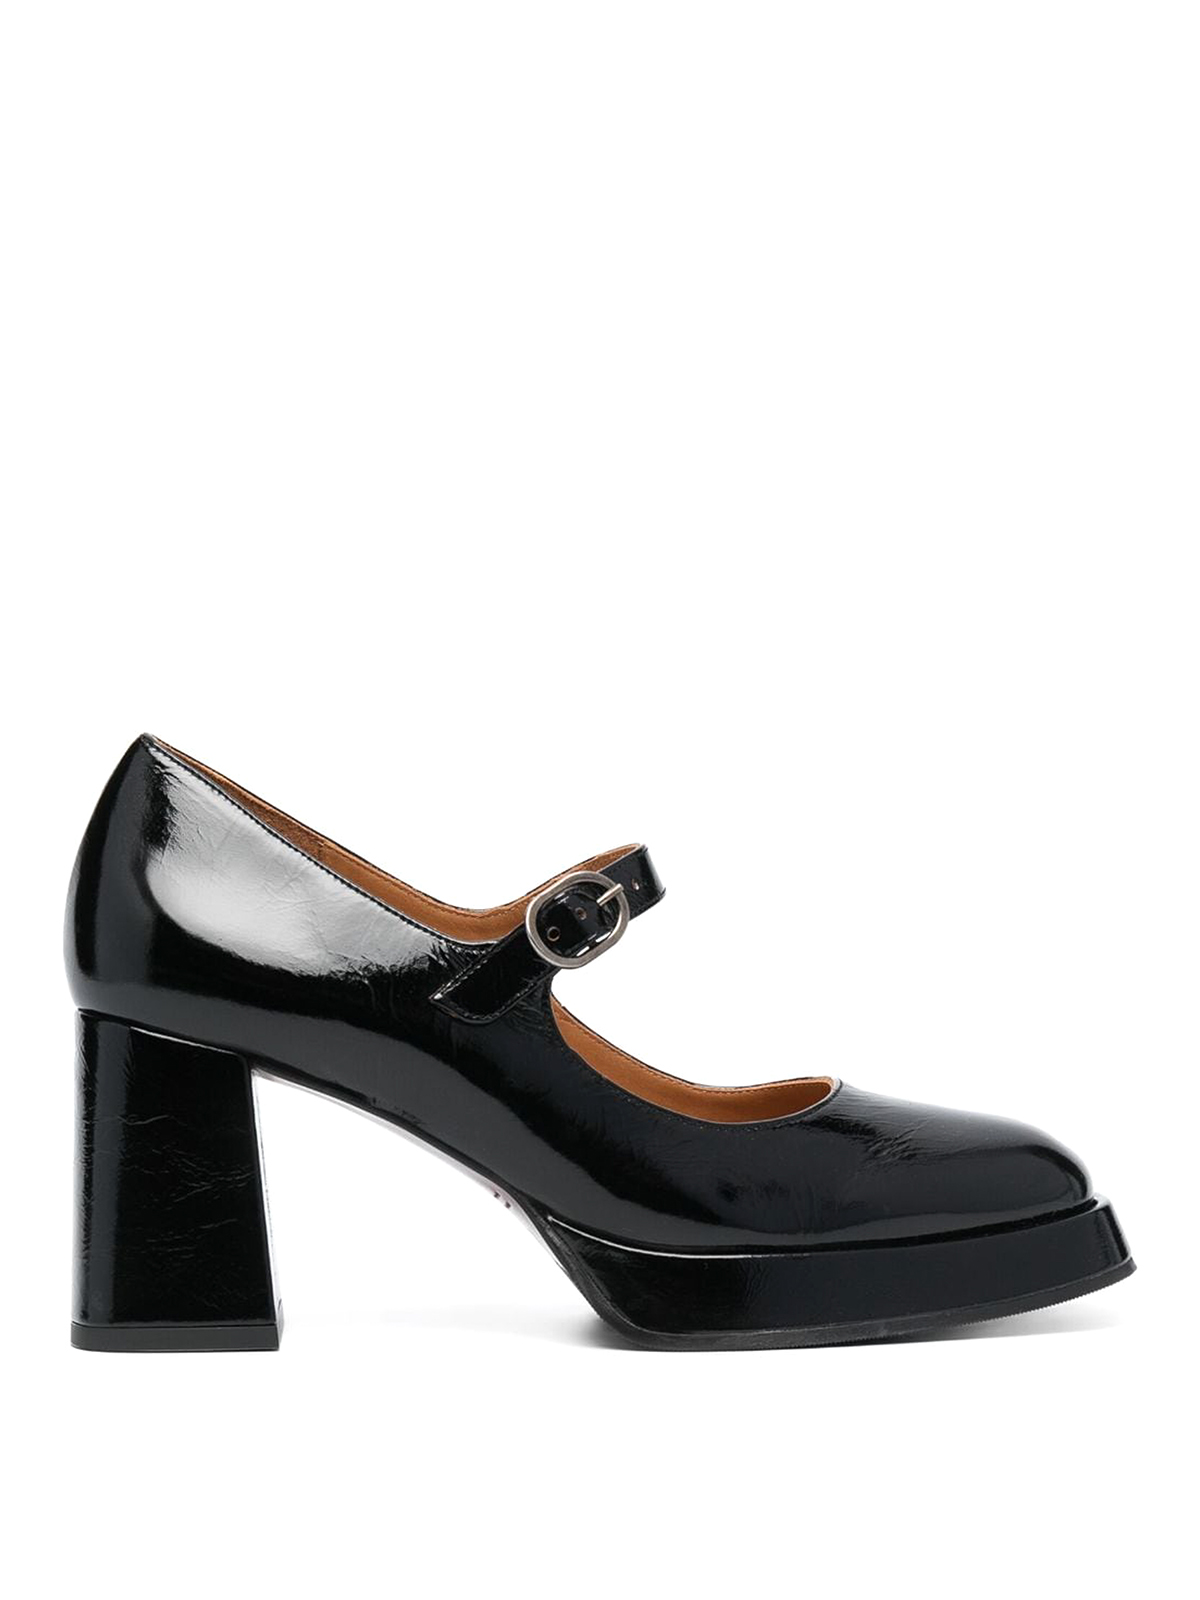 Court shoes Chie Mihara - Pumps - KABABLACK | Shop online at THEBS [iKRIX]